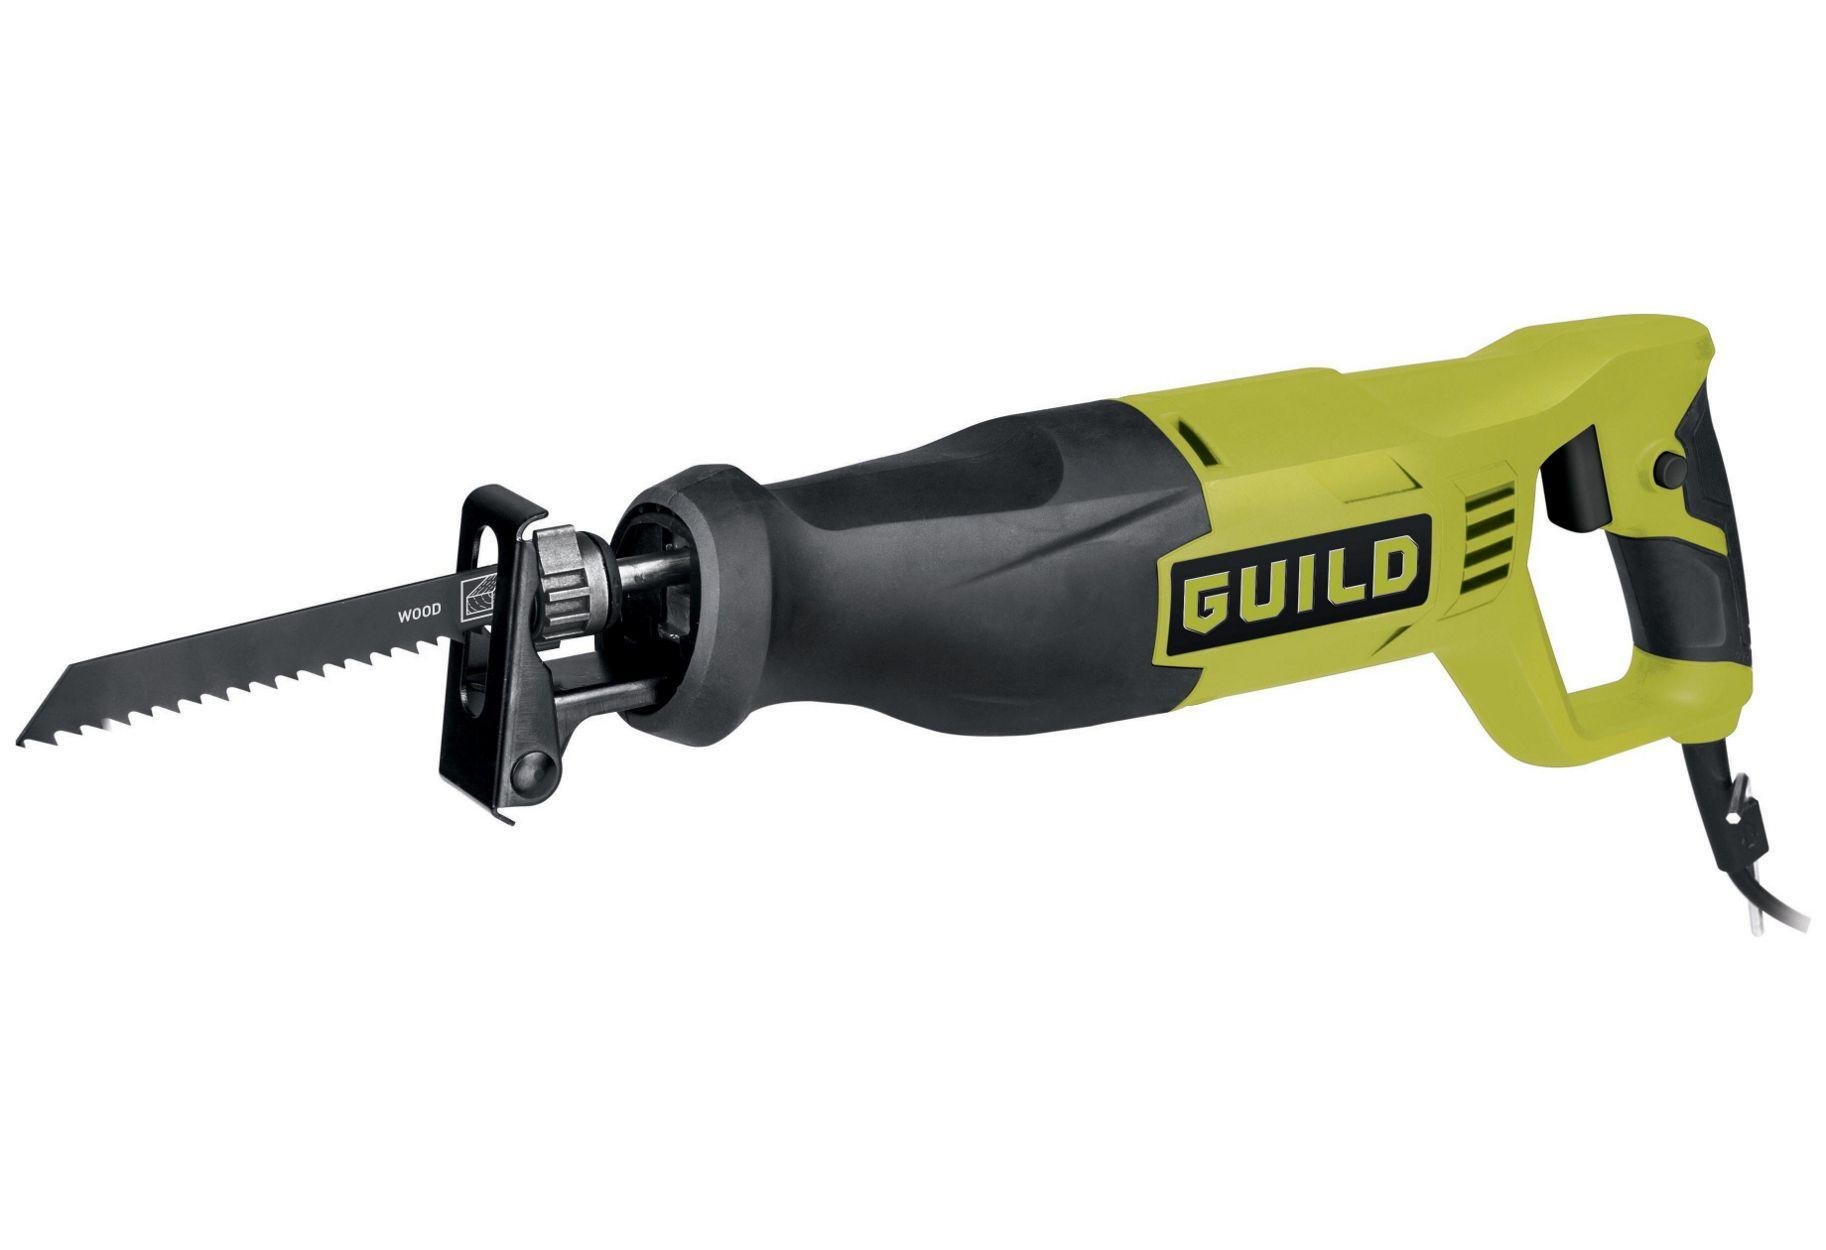 Guild Reciprocating Saw 800W